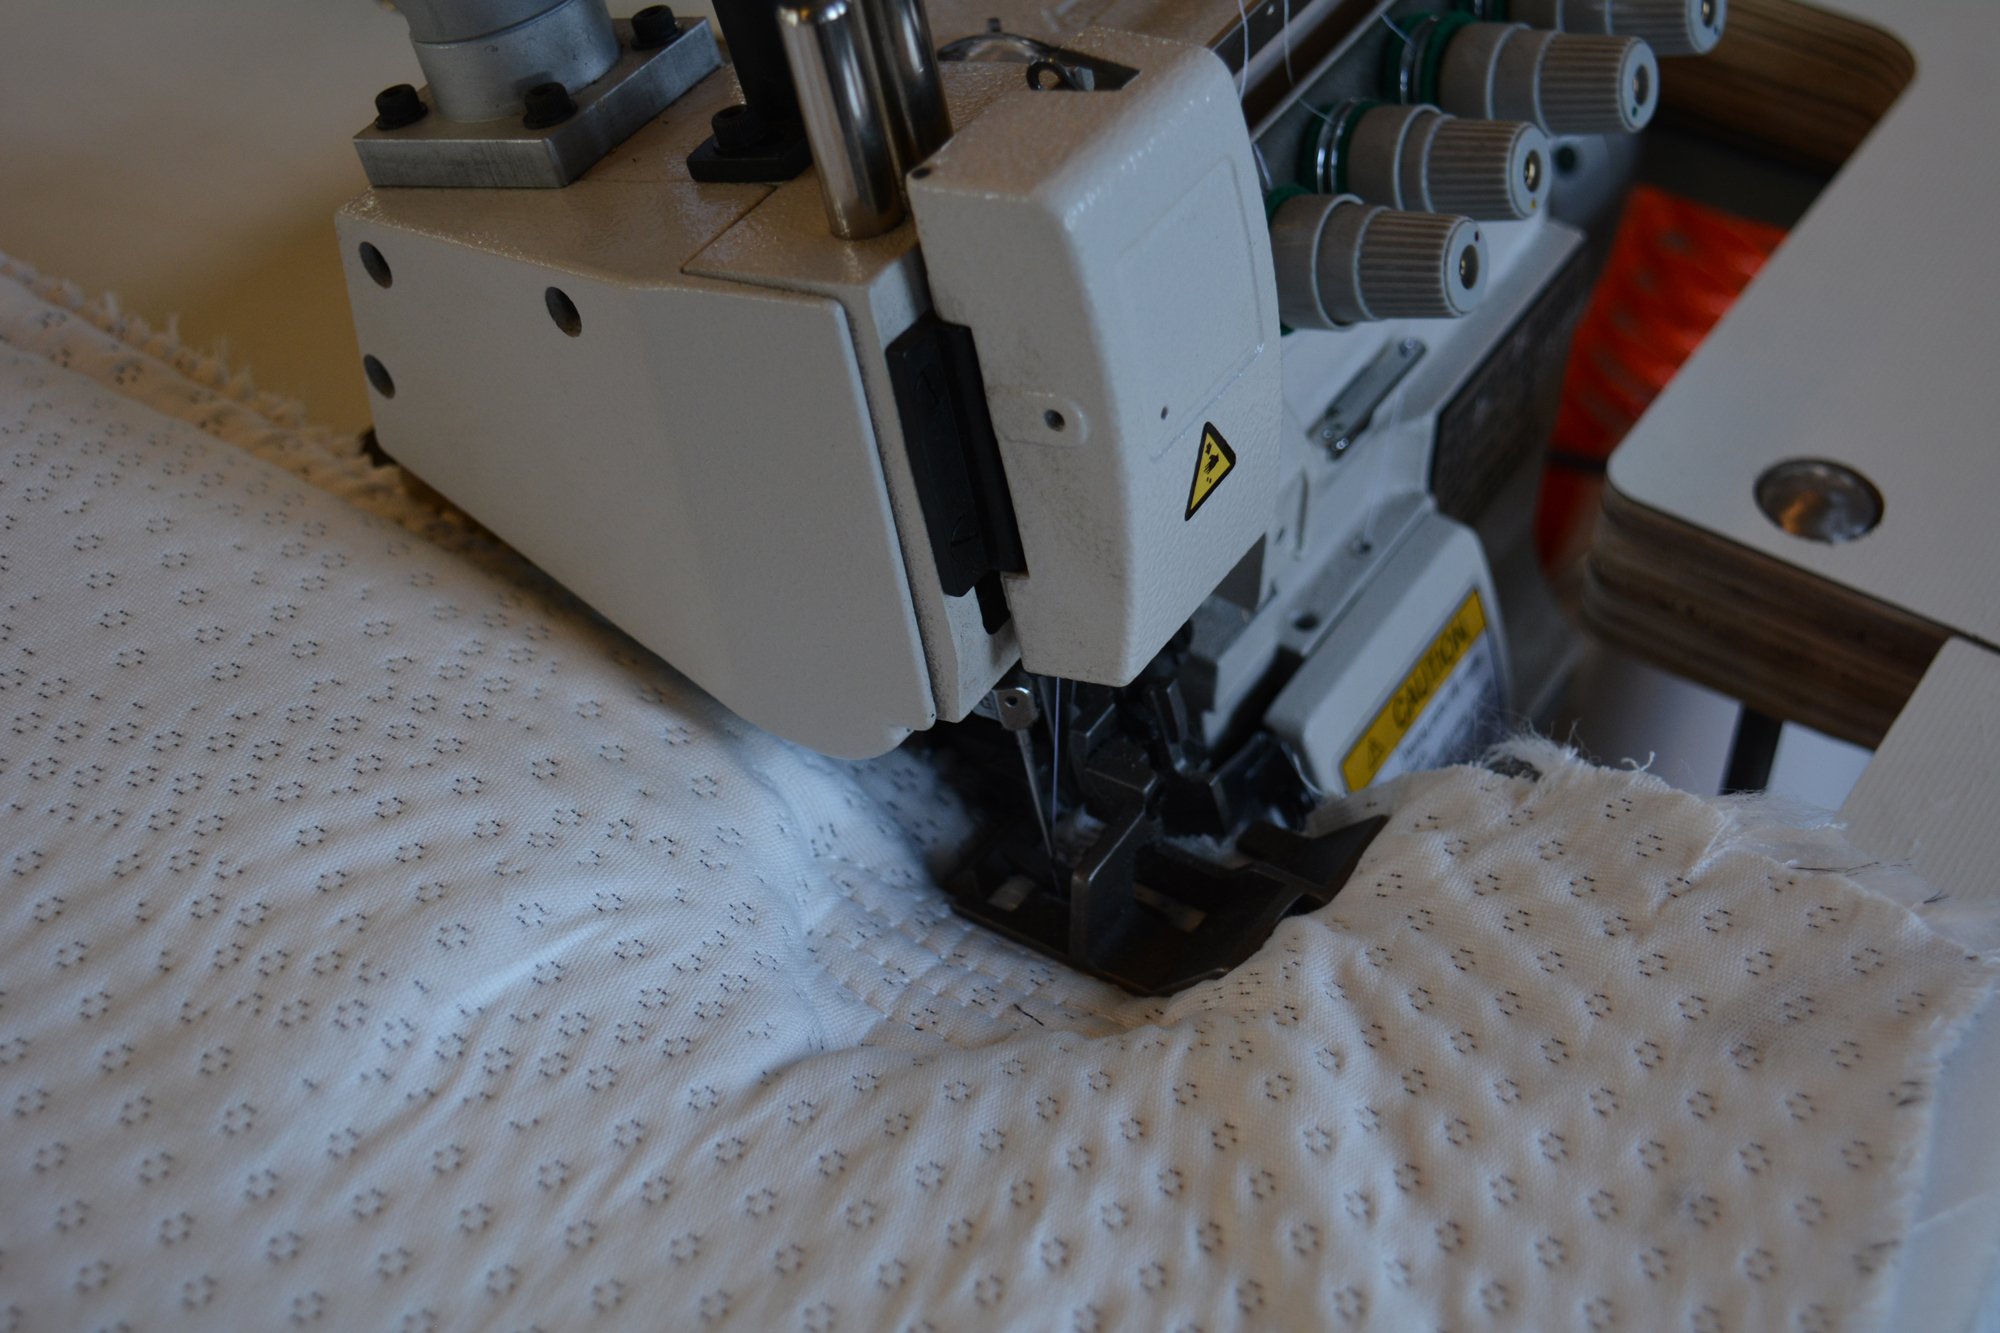 Square improves mattress flanging machine on heavy material feeding system